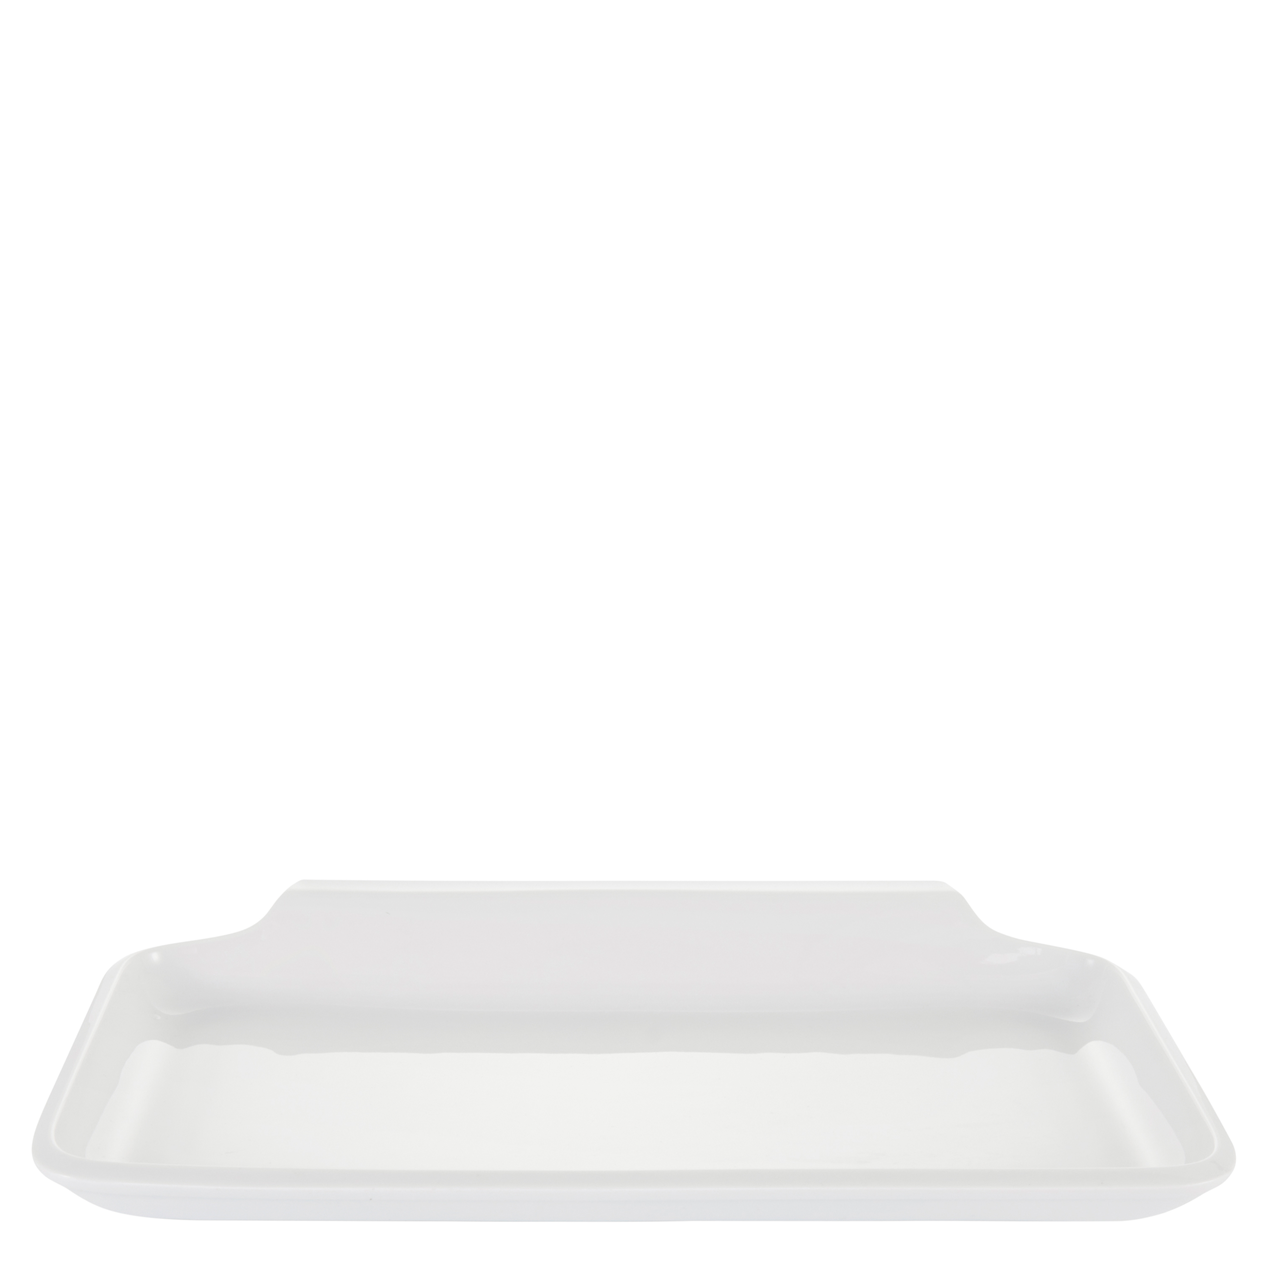 Mr. Serving Plate 32 x 19 cm SYNERGY